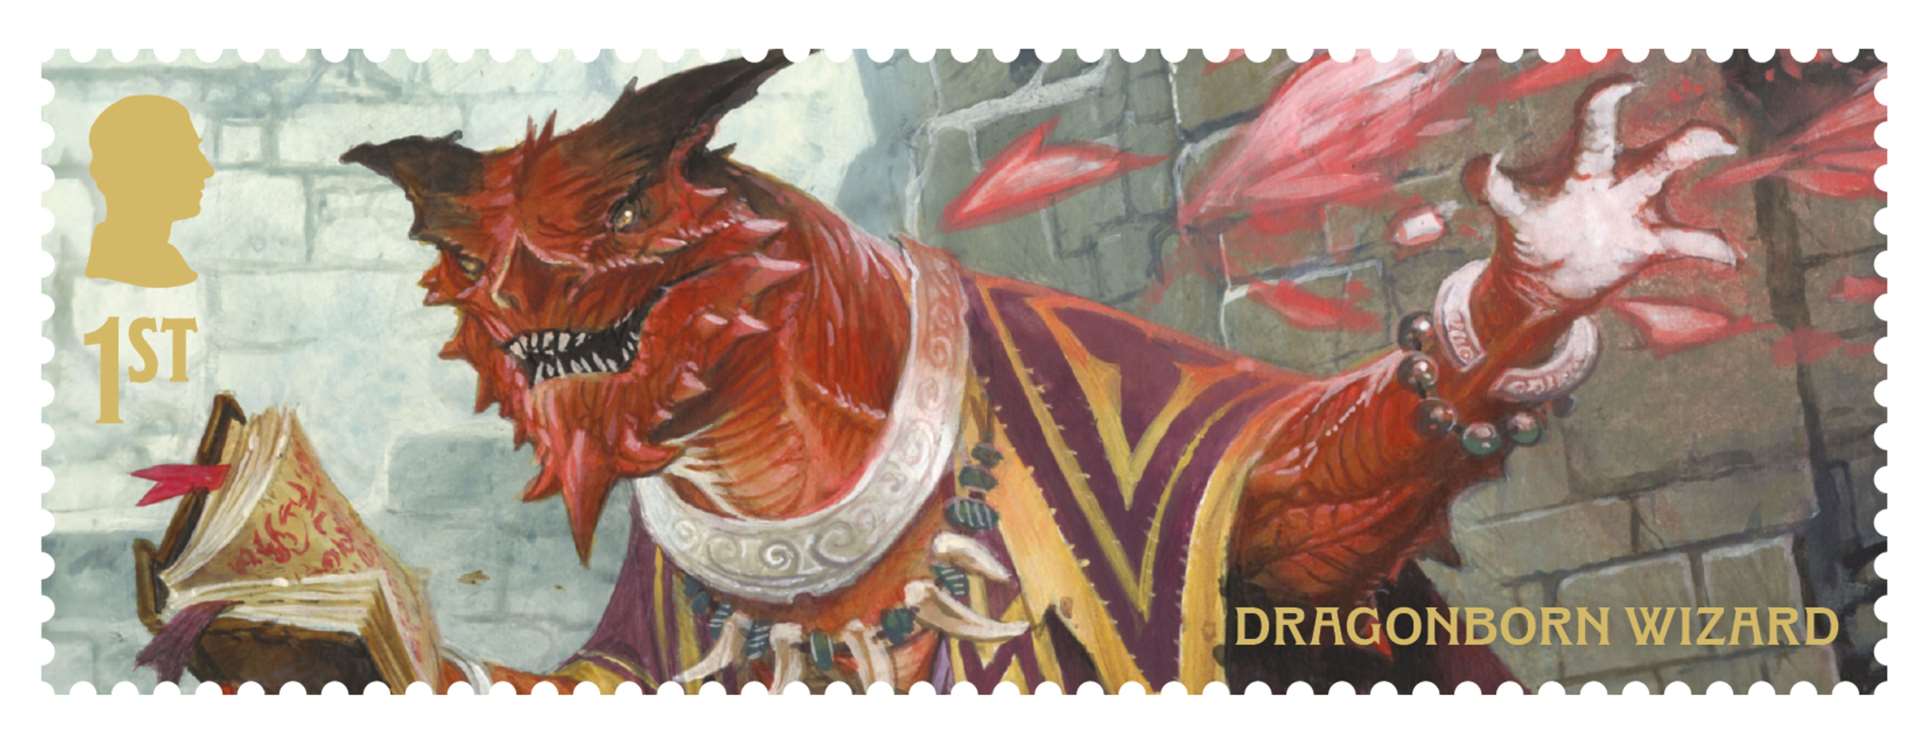 D&D’s fantasy world and monsters have influenced fantasy tropes in film, television and video games to this day (Royal Mail/PA)